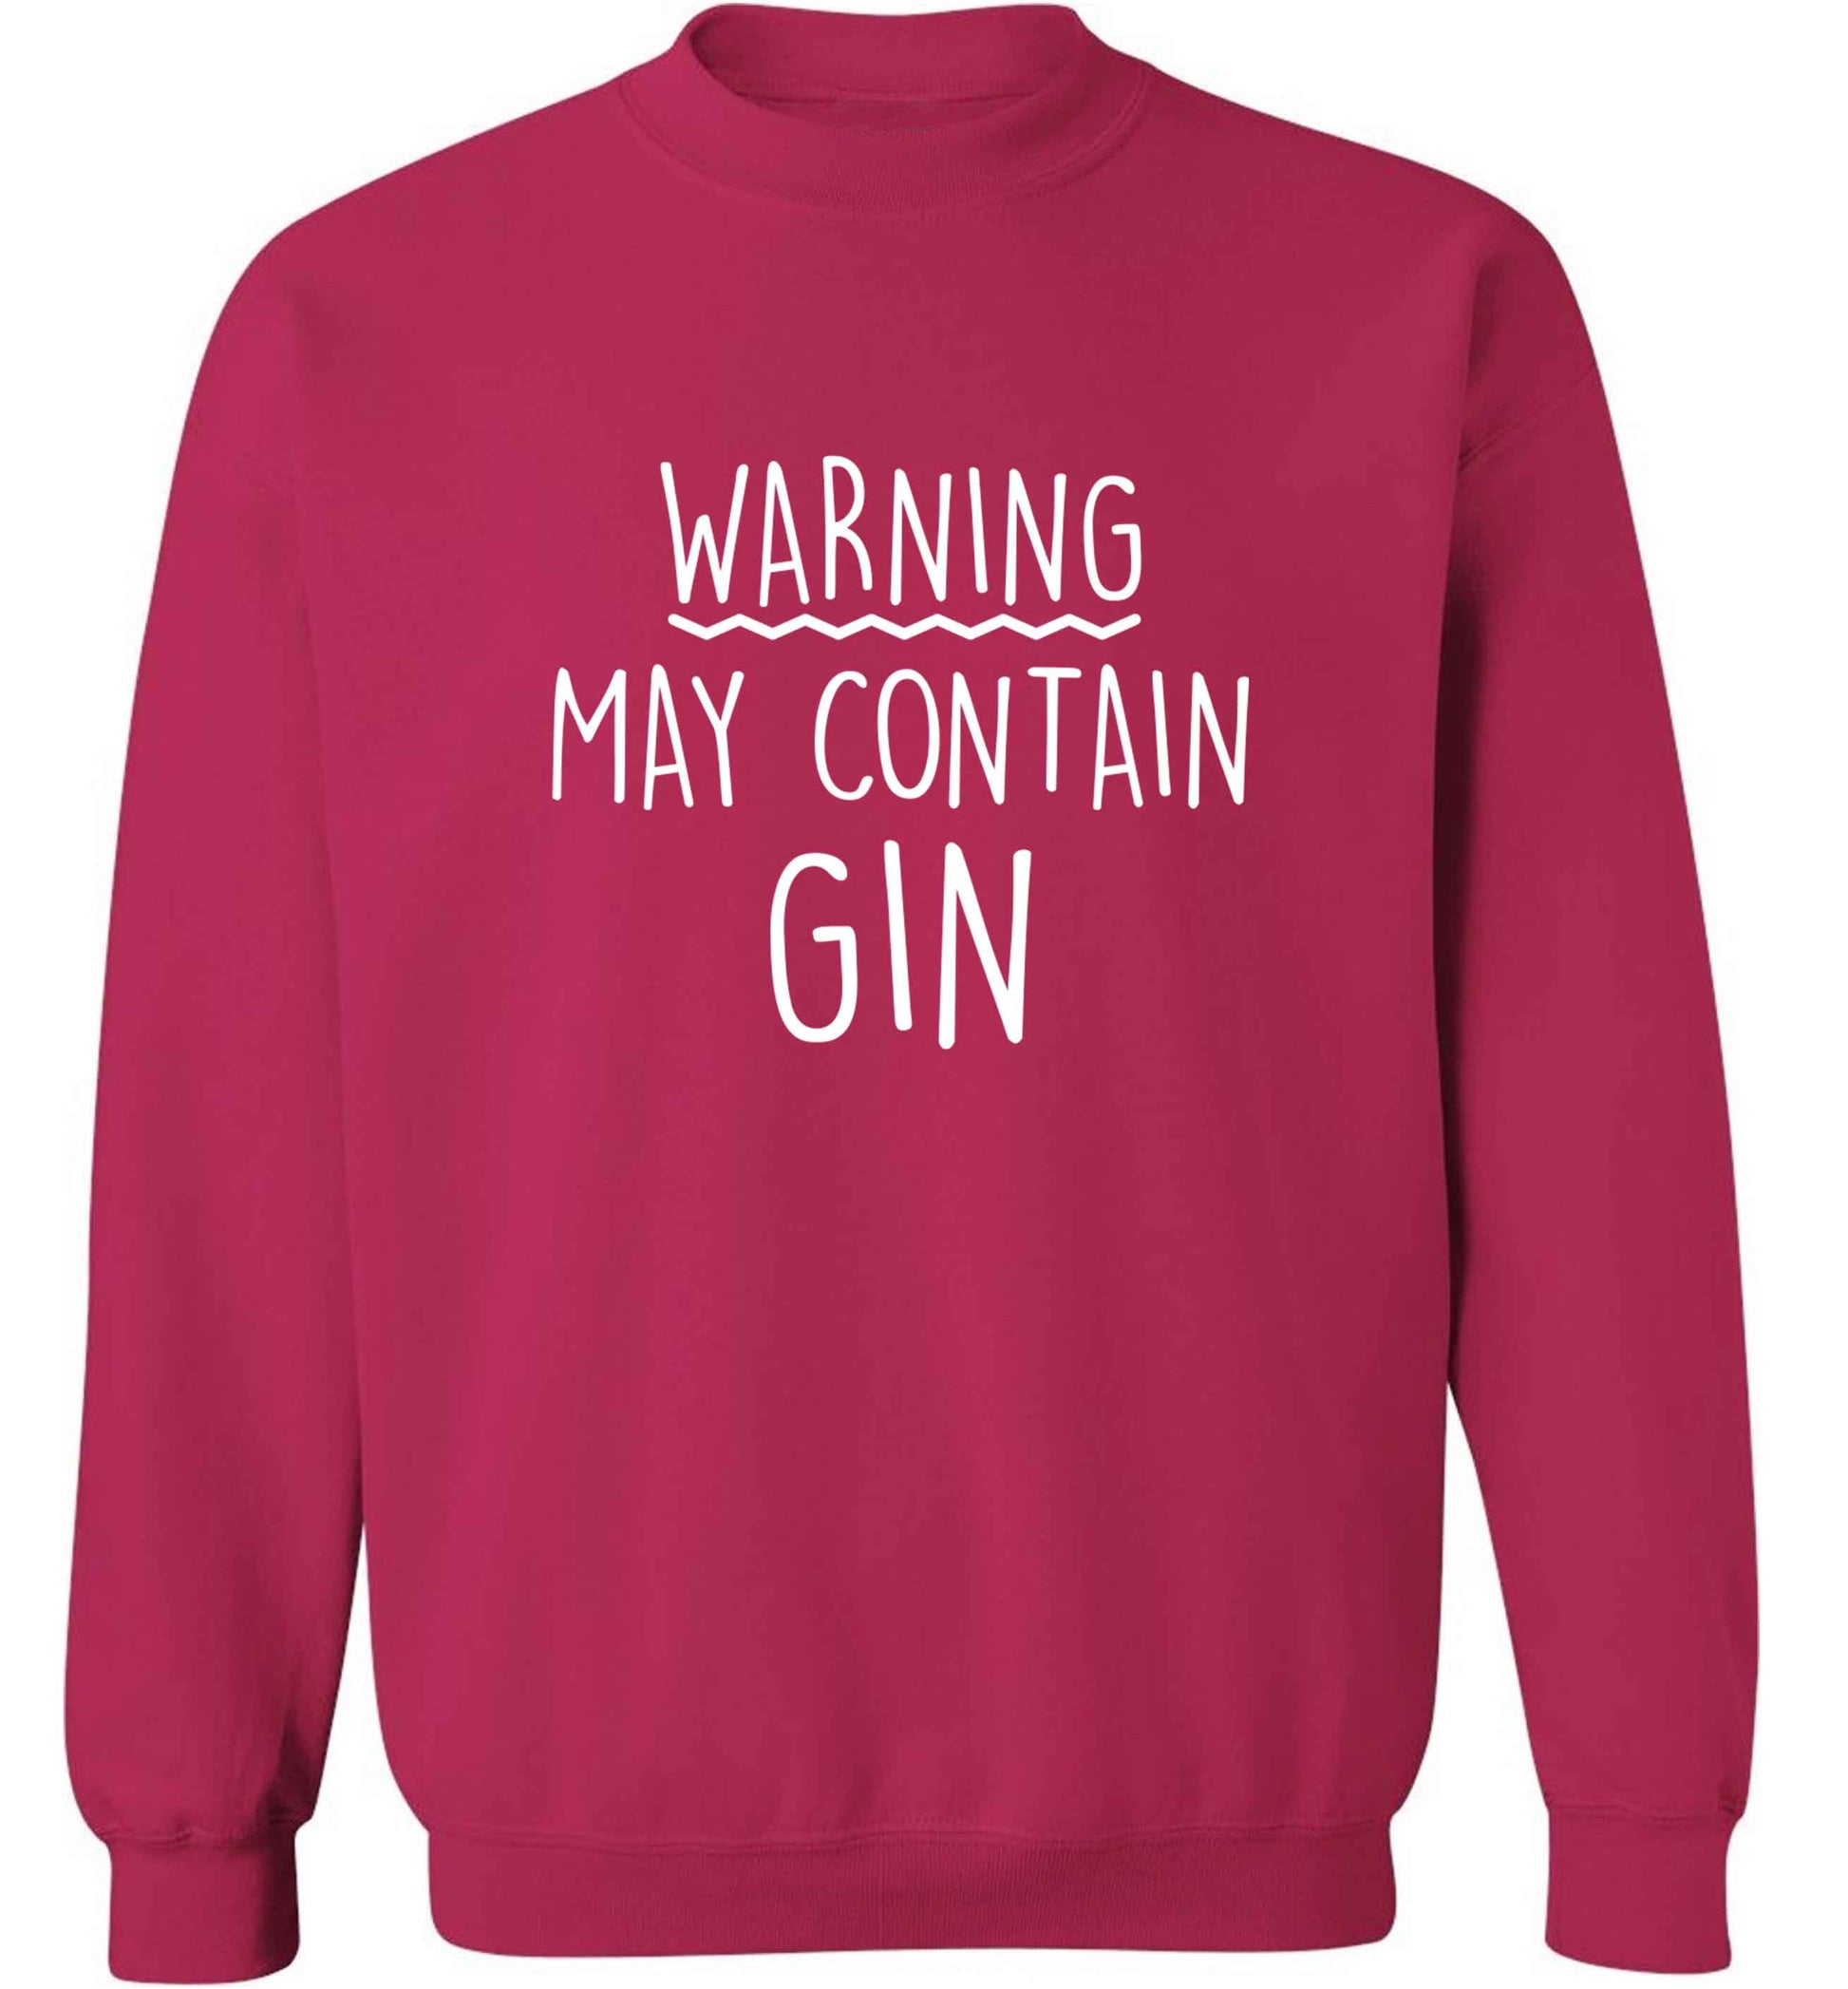 Warning may contain gin adult's unisex pink sweater 2XL